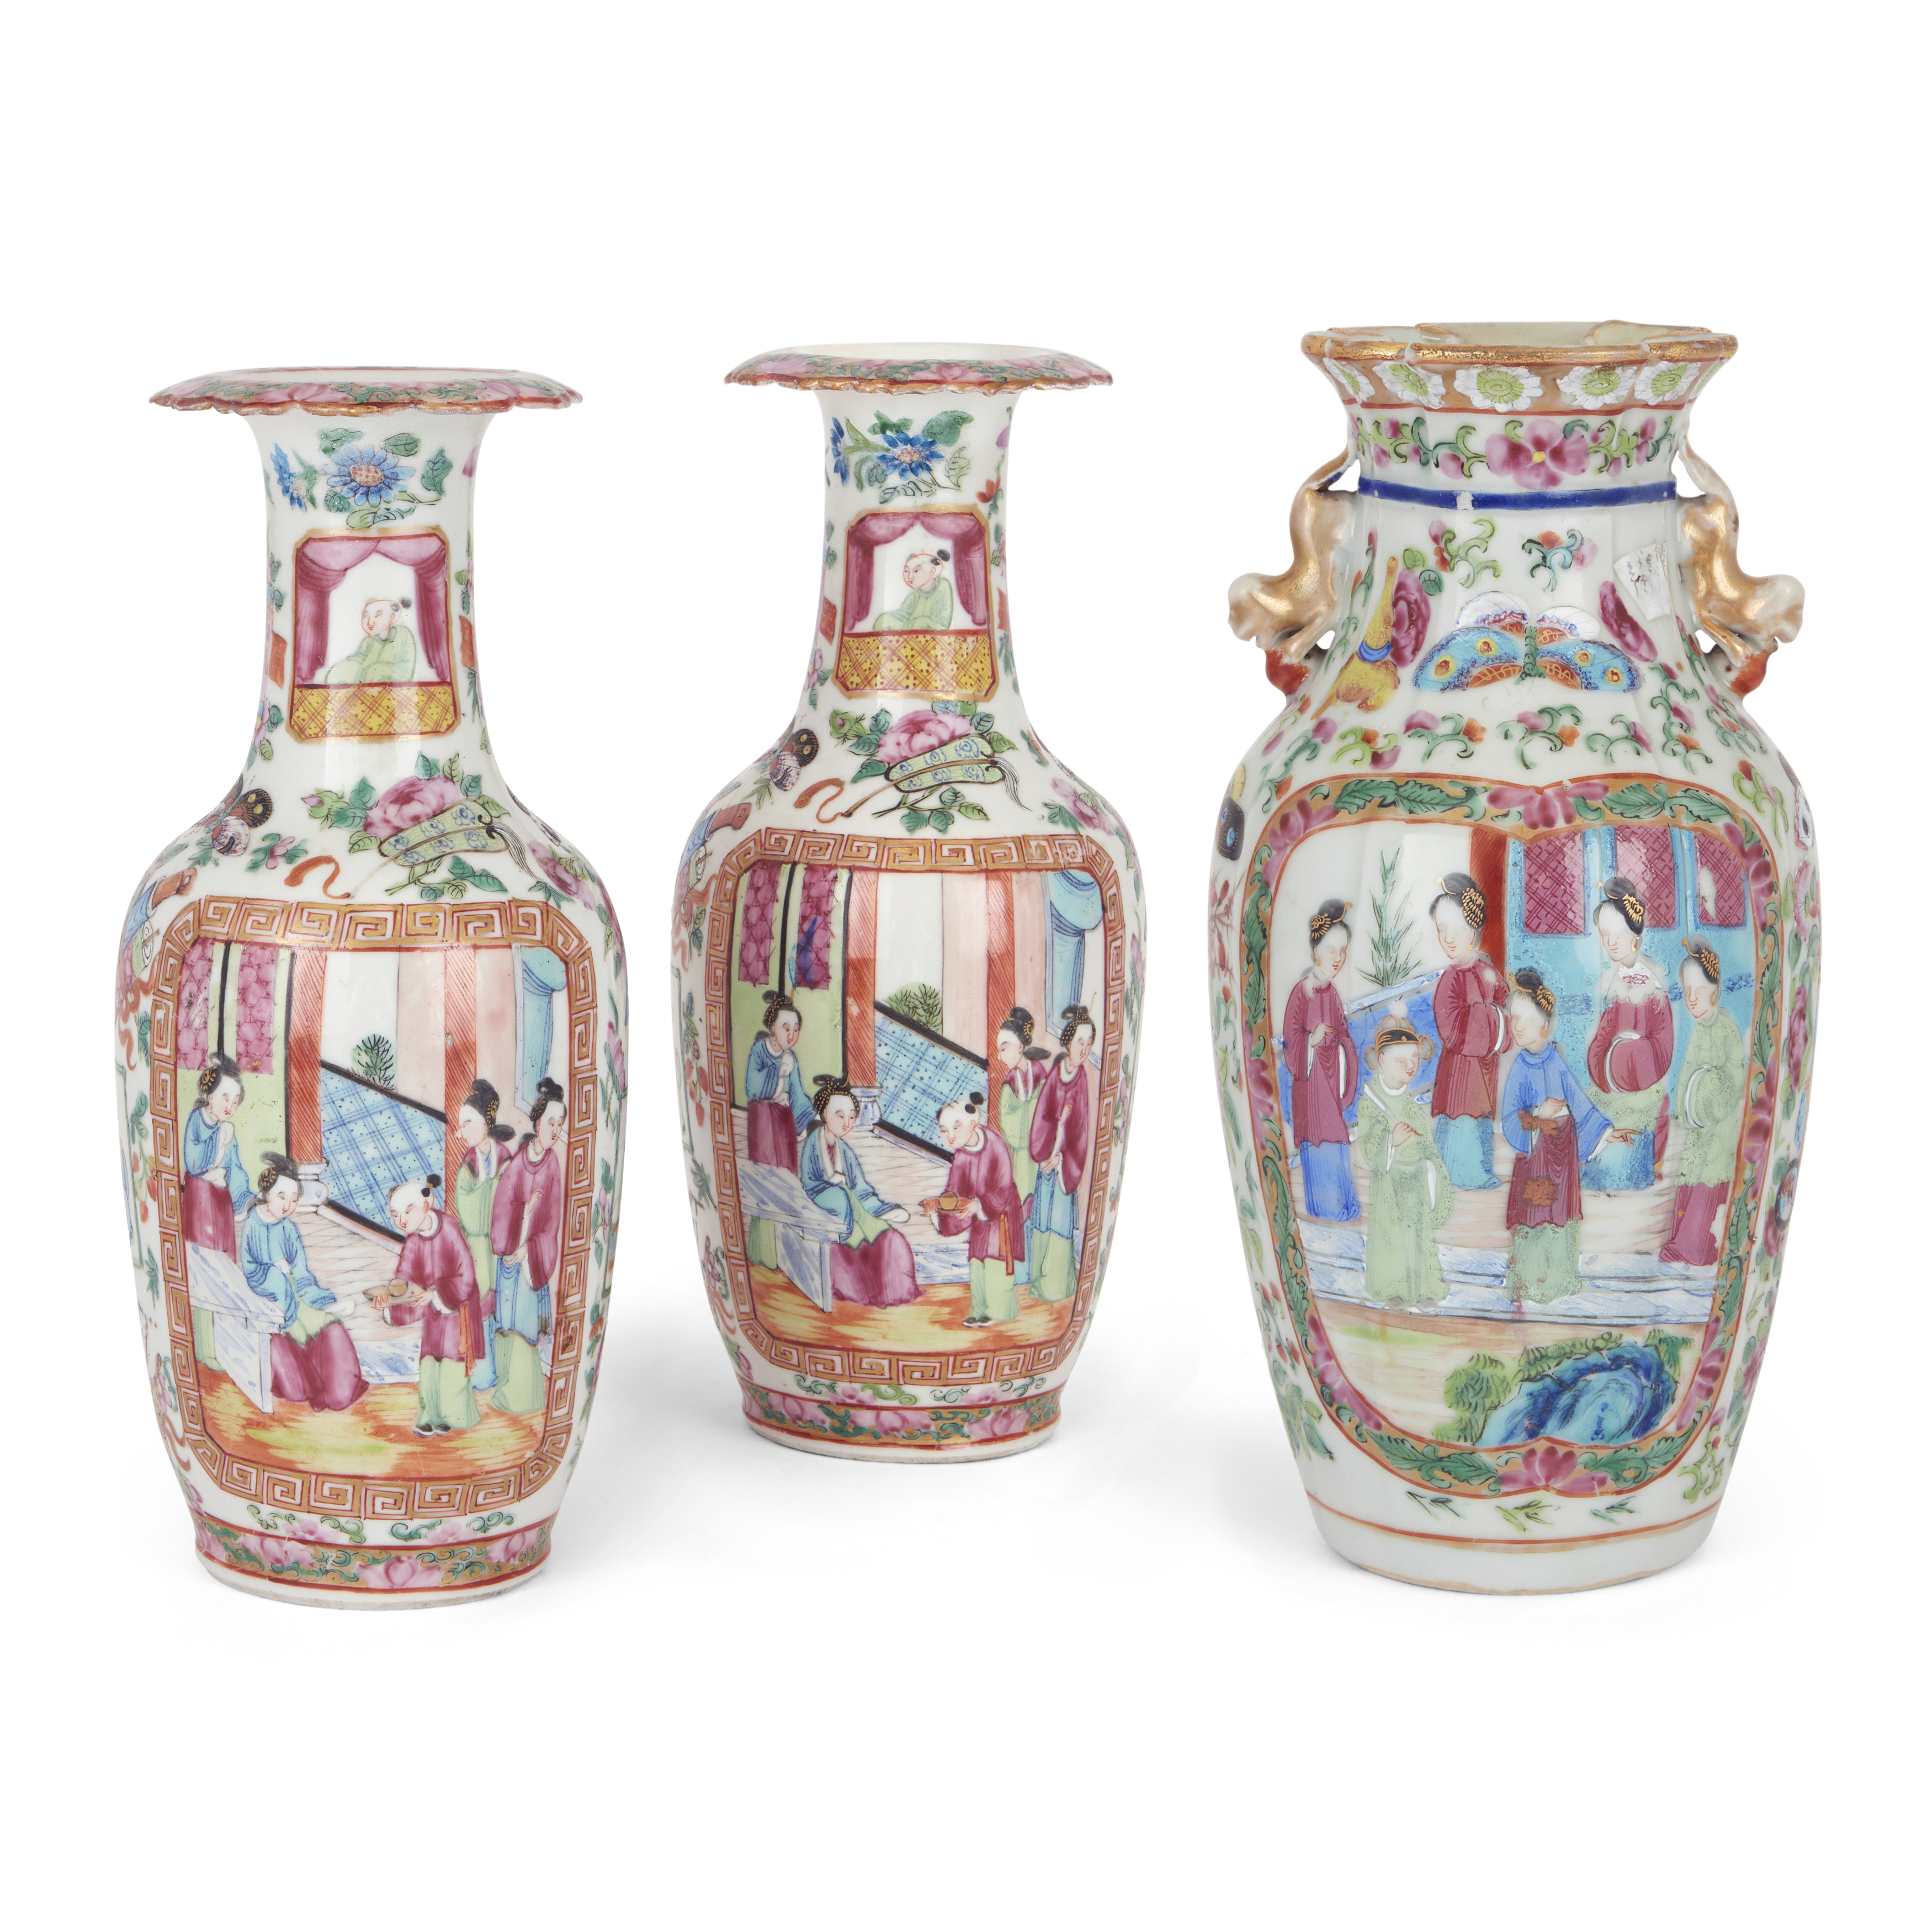 Three Chinese Canton famille rose vases, Qing dynasty, 19th century, comprising a pair and a sing...